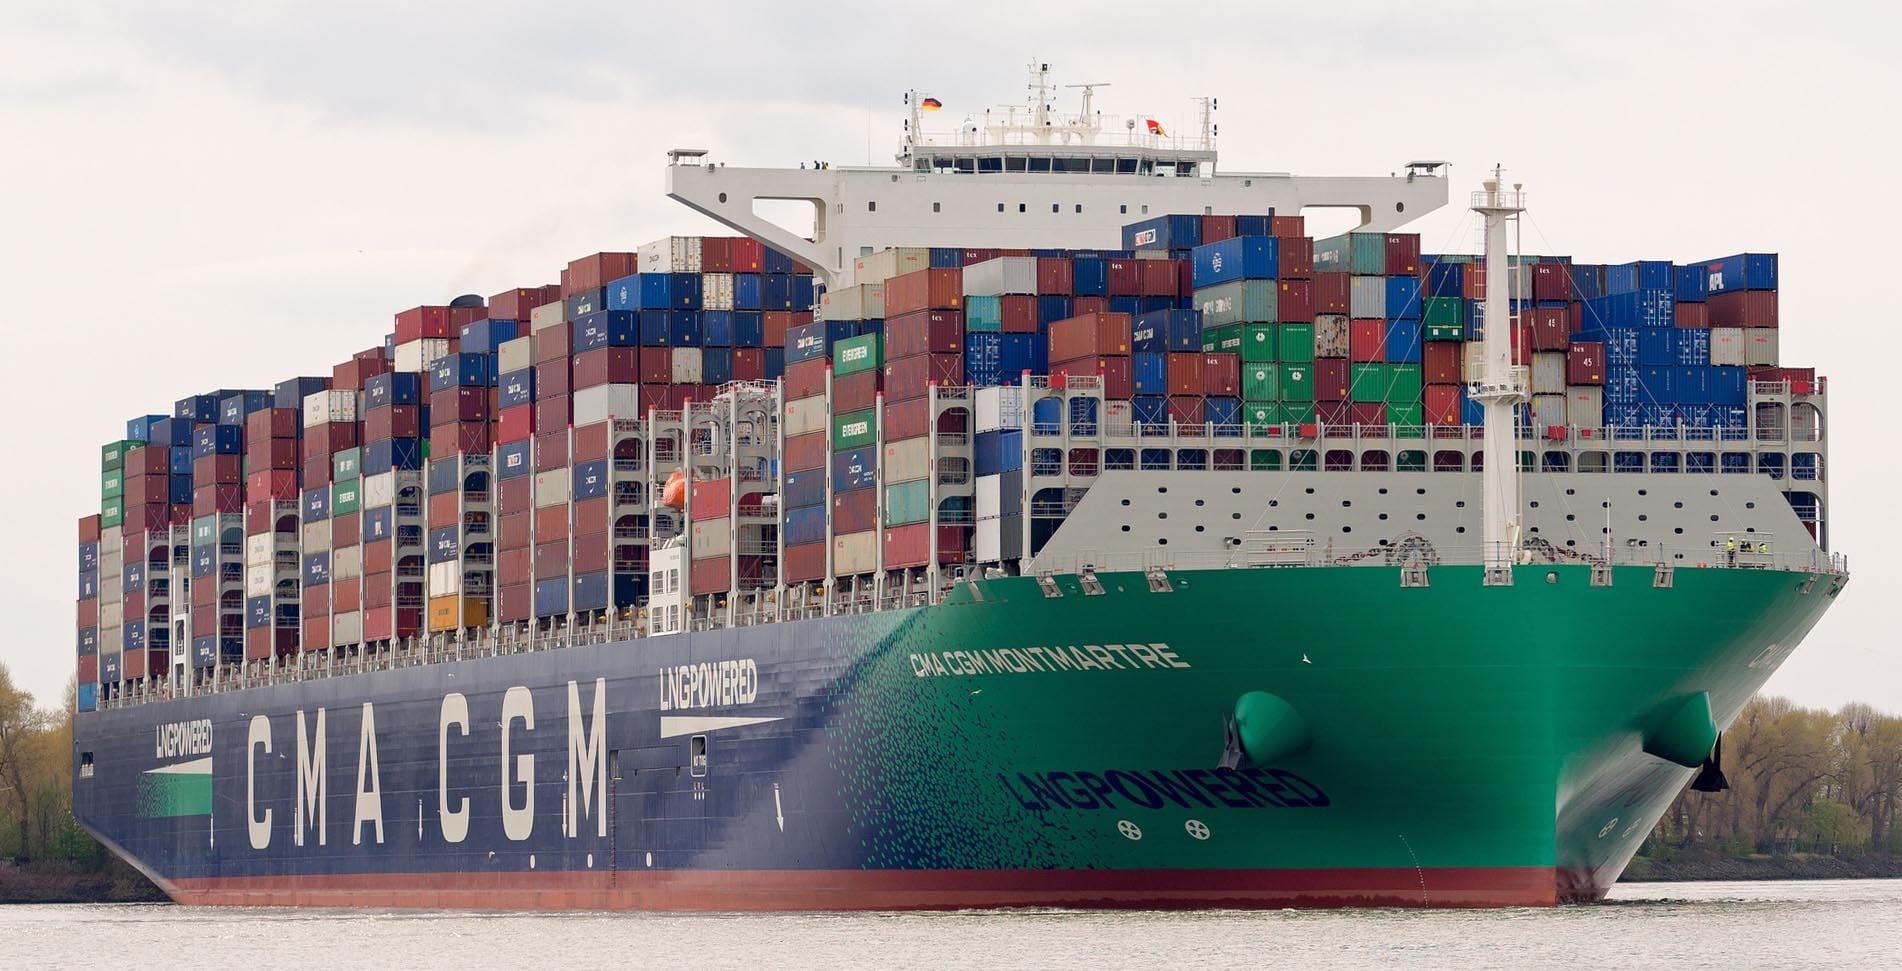 CMA CGM says LNG-powered containership breaks new record